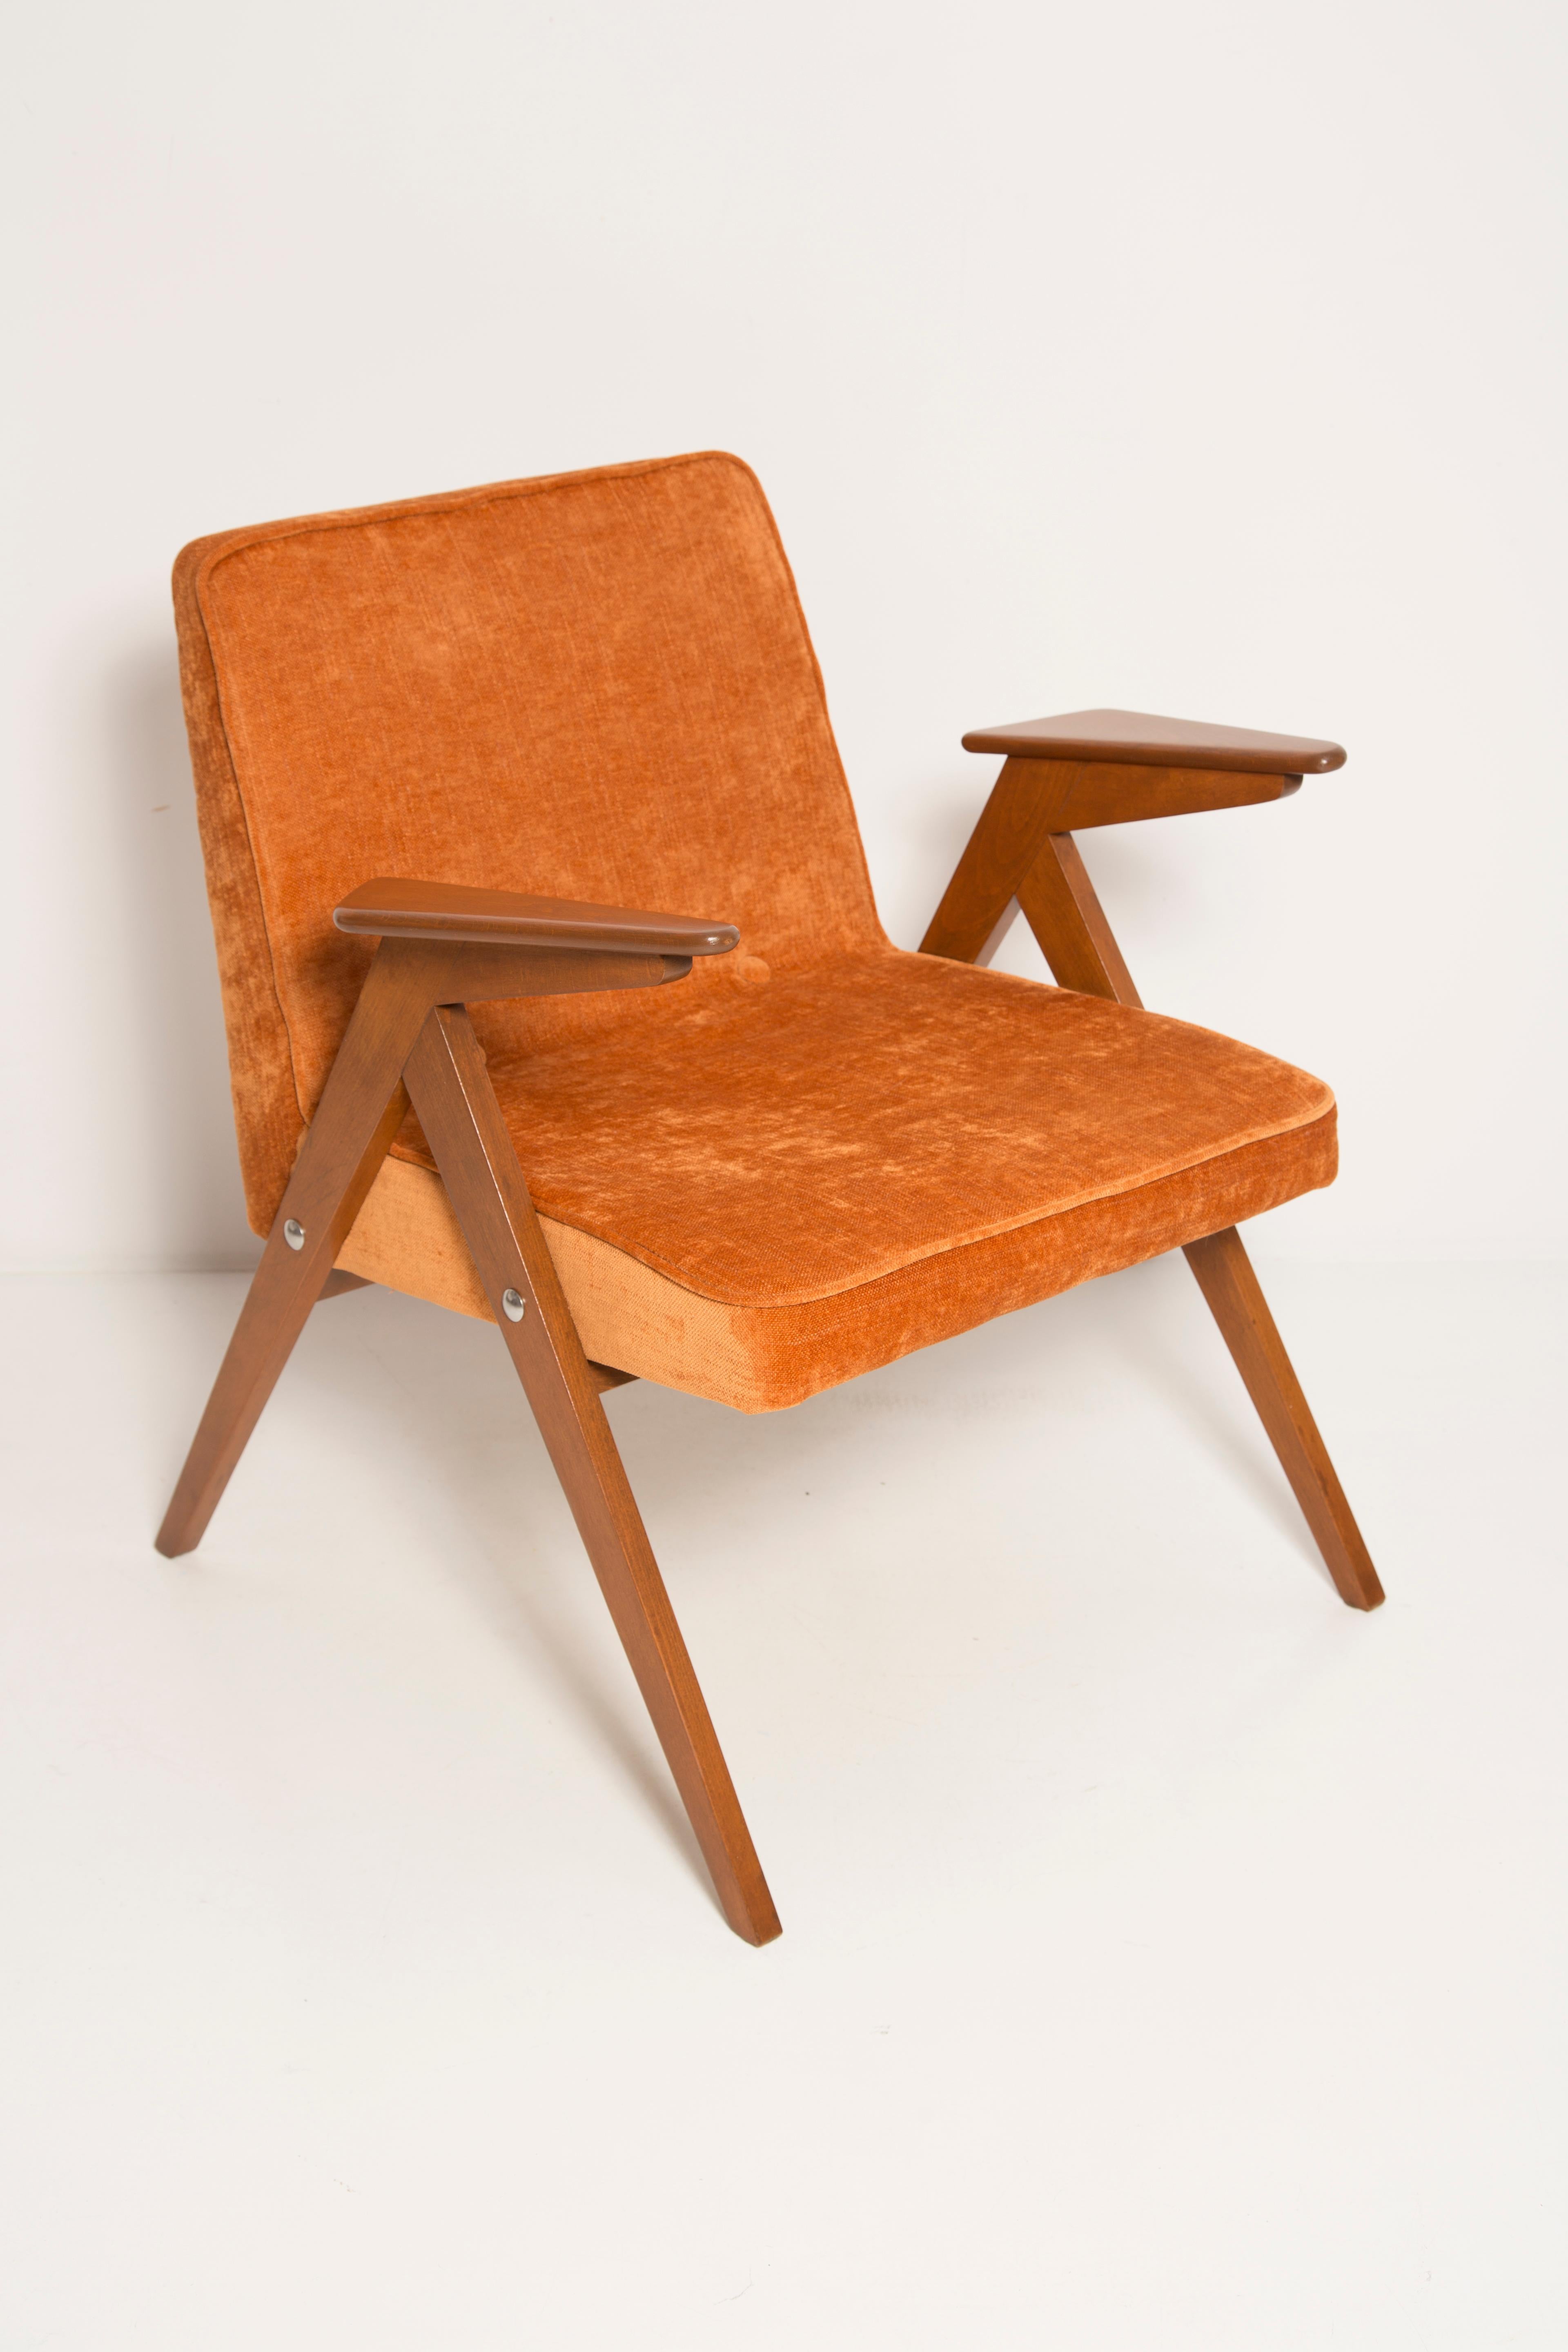 20th Century Set of Two Midcentury Orange Bunny Armchairs by Jozef Chierowski, Poland, 1960s For Sale